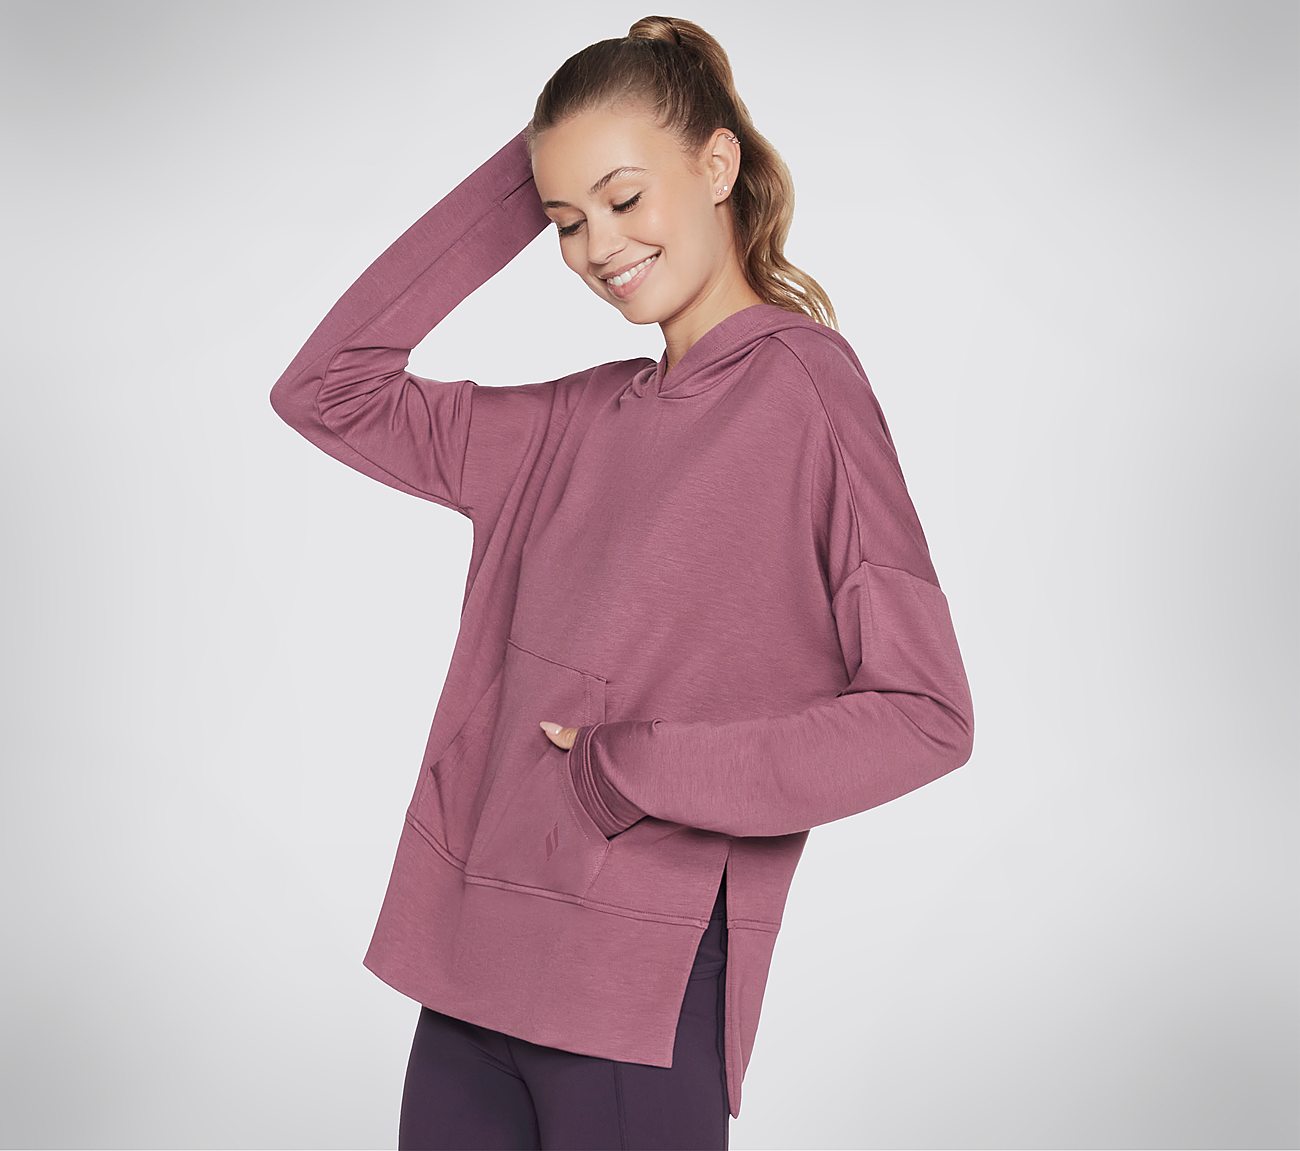 SKECHLUXE RESTFUL LONG SLEEVE, DARK MAUVE Apparel Lateral View